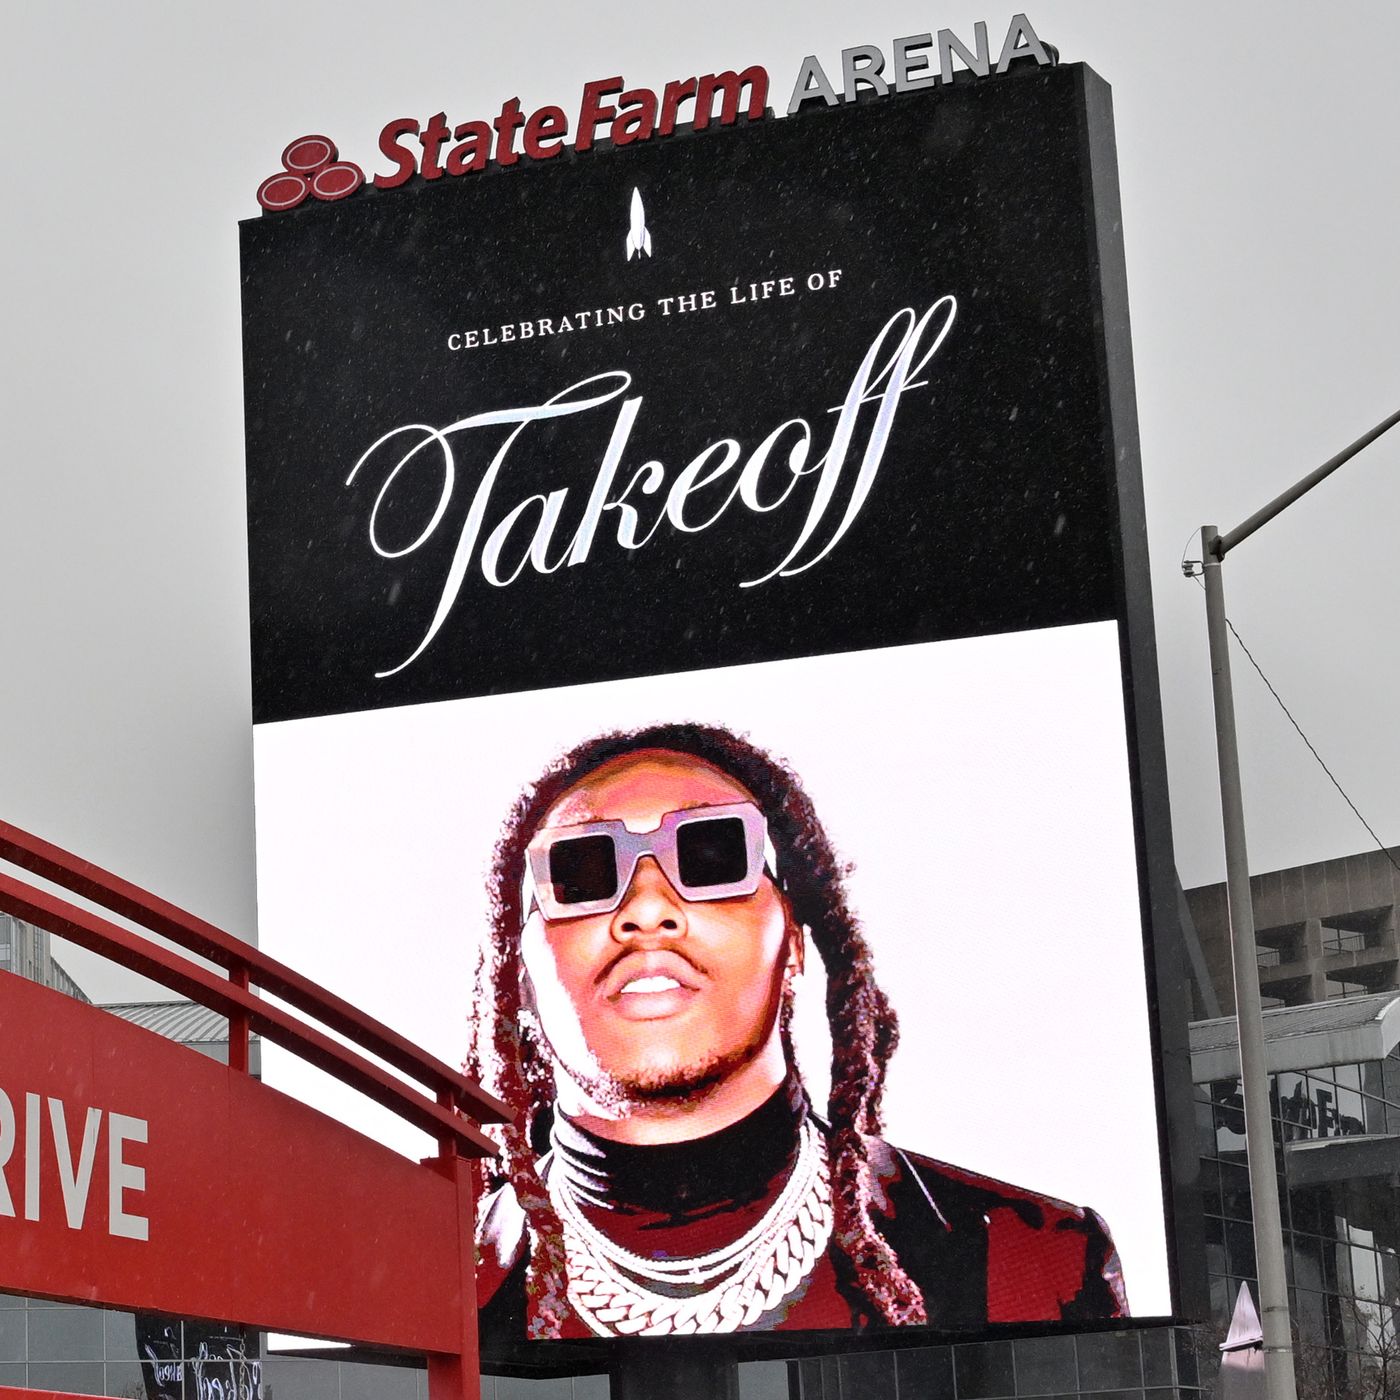 Cardi B honors Takeoff with Migos video about 'family